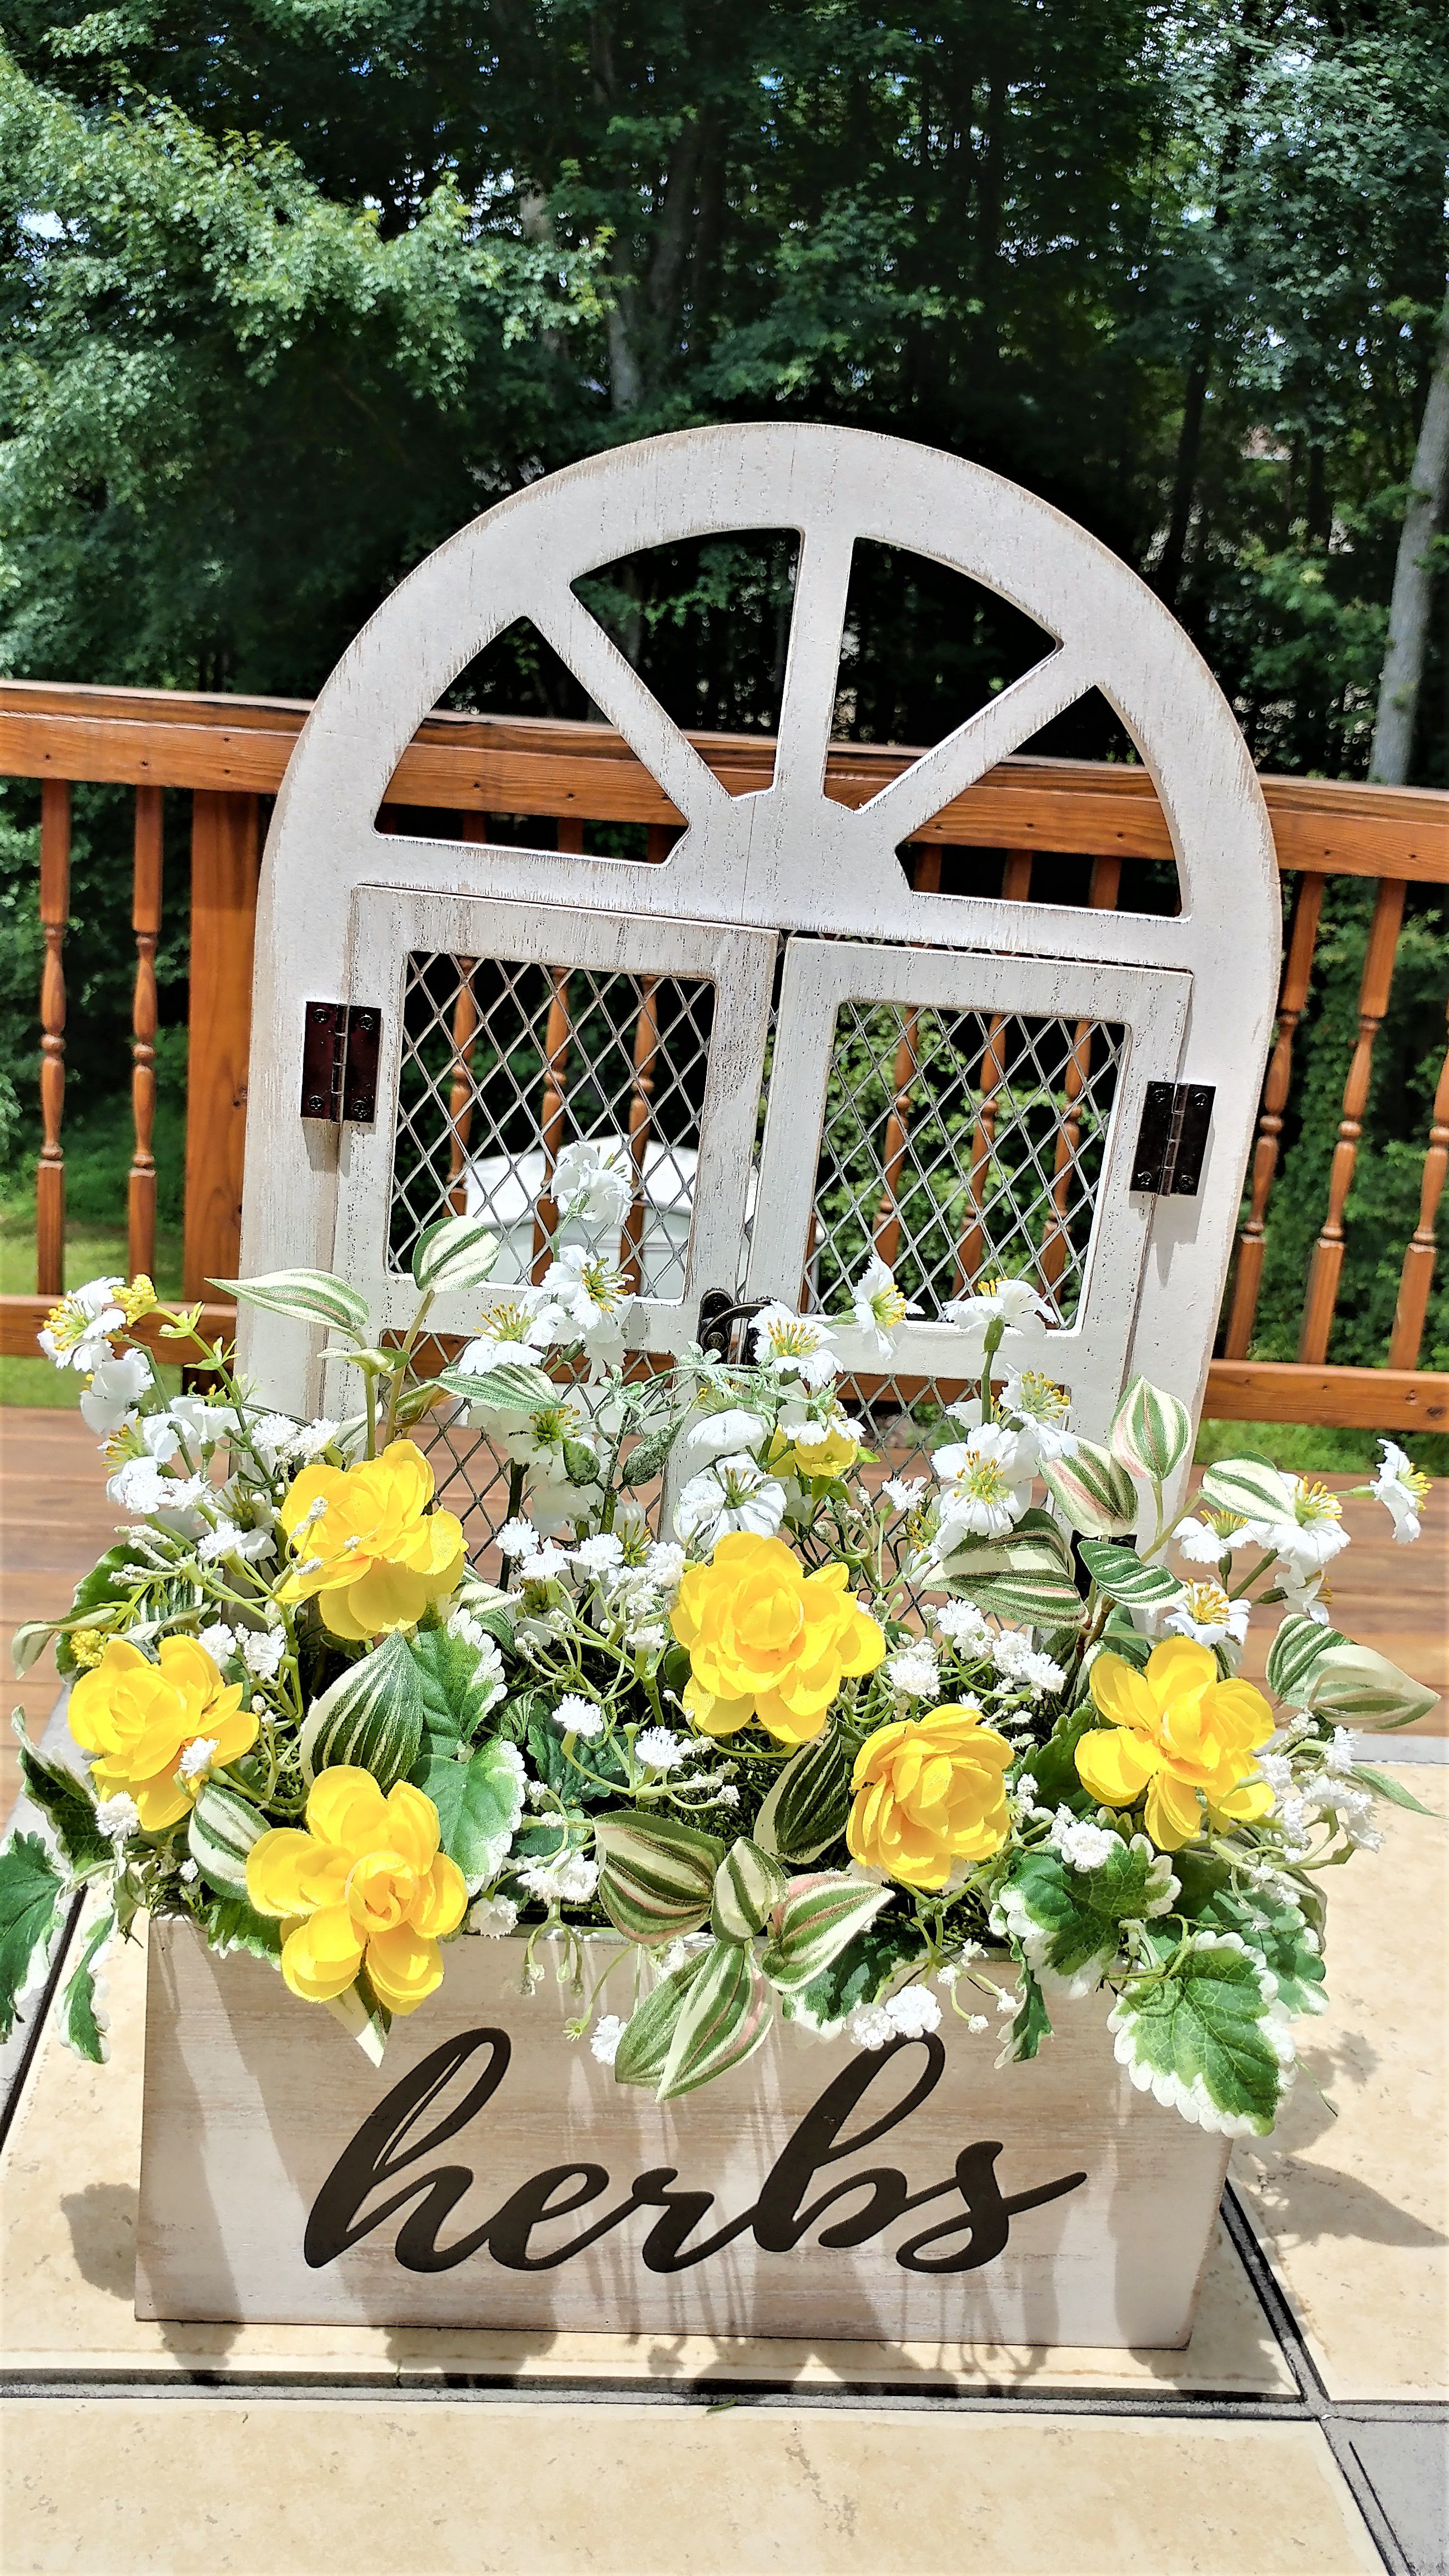 Rustic White Wooden Hanging Wall Planter with Yellow and White